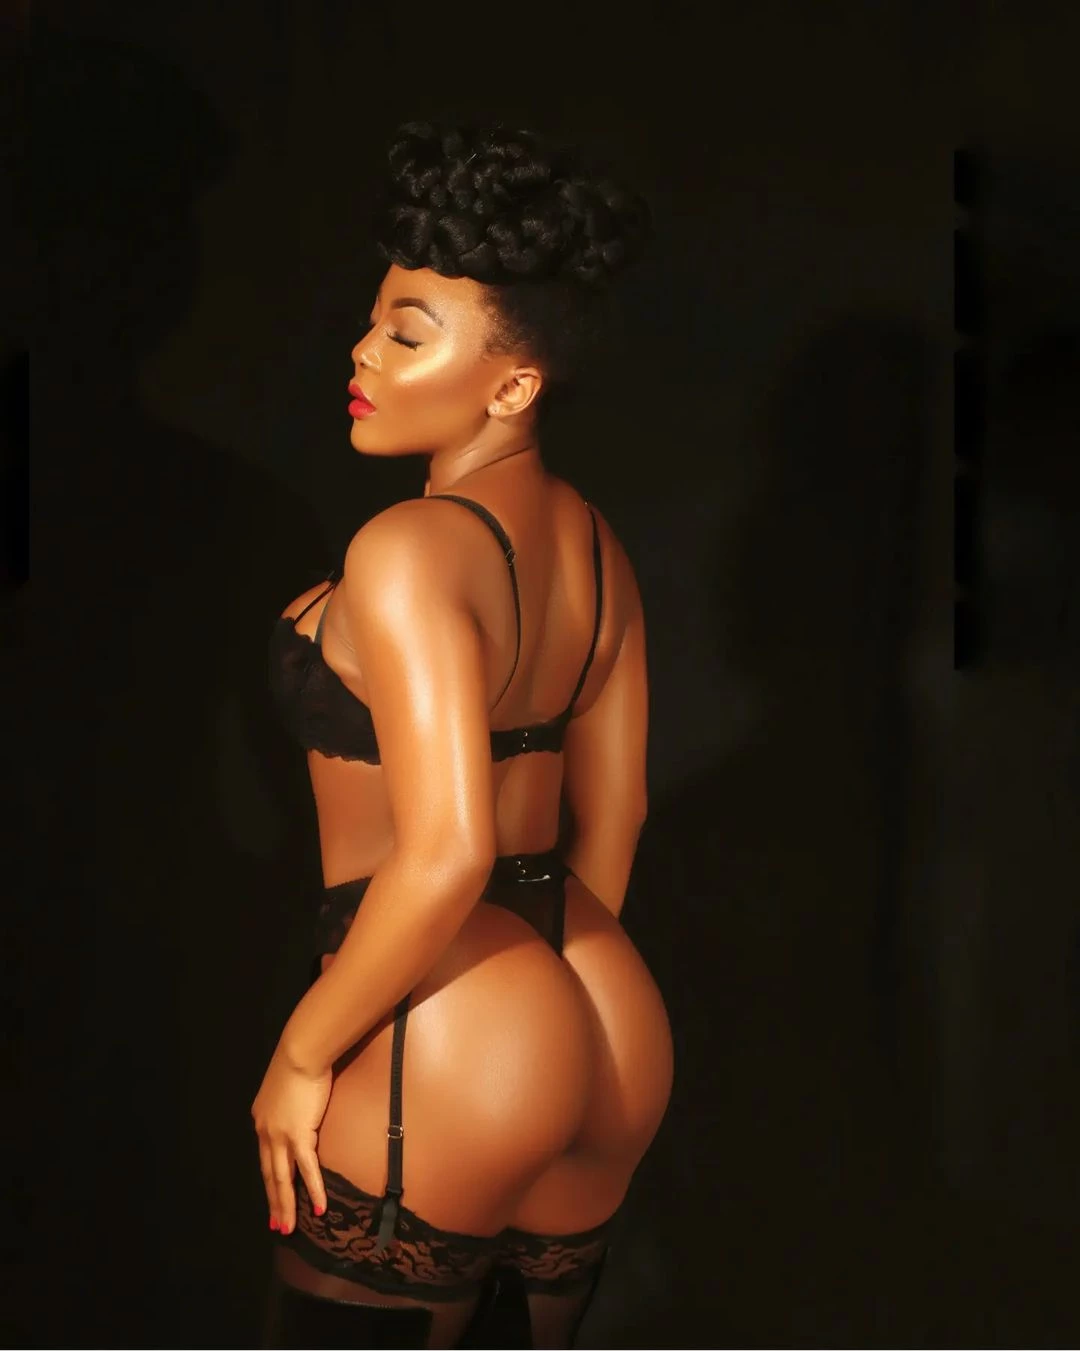 Reality TV star, "Ifuennada" shows off her butt in racy photos, Reality TV star, &#8220;Ifuennada&#8221; shows off her butt in racy photos, INFINITY LOADED